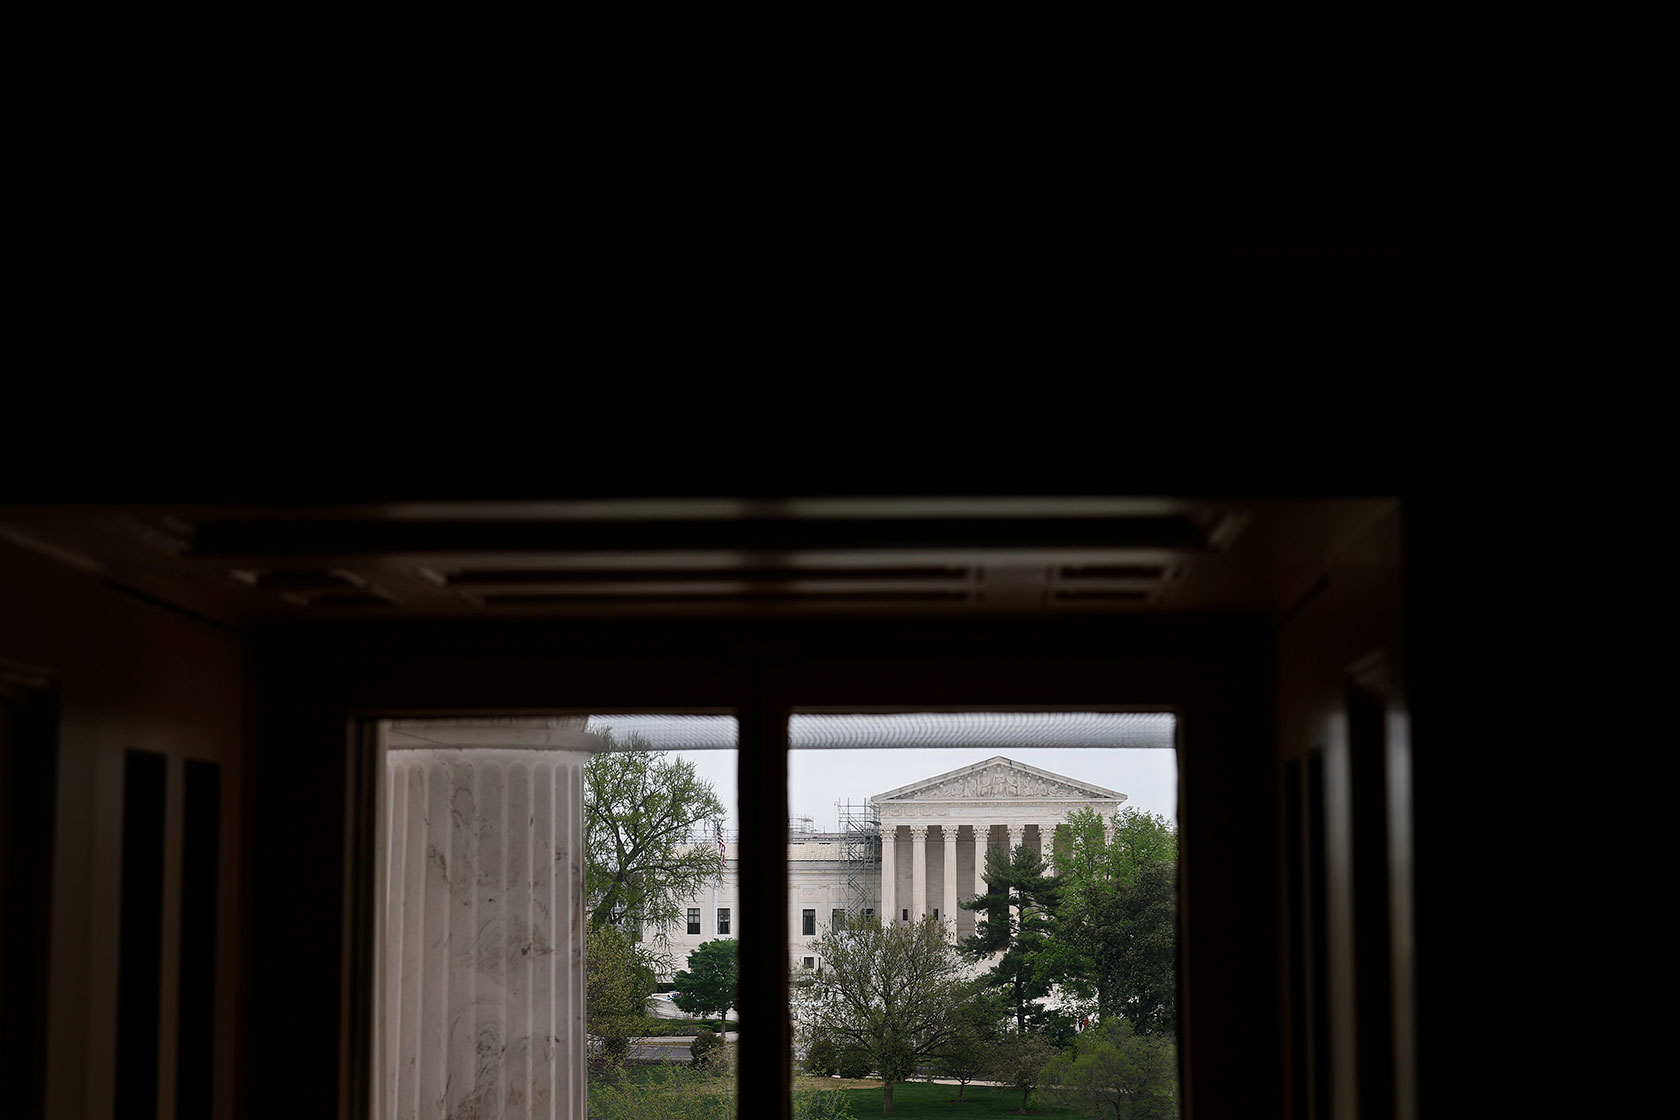 Photo shows a view of the U.S. Supreme Court building against a light grey sky, viewed through a dark window